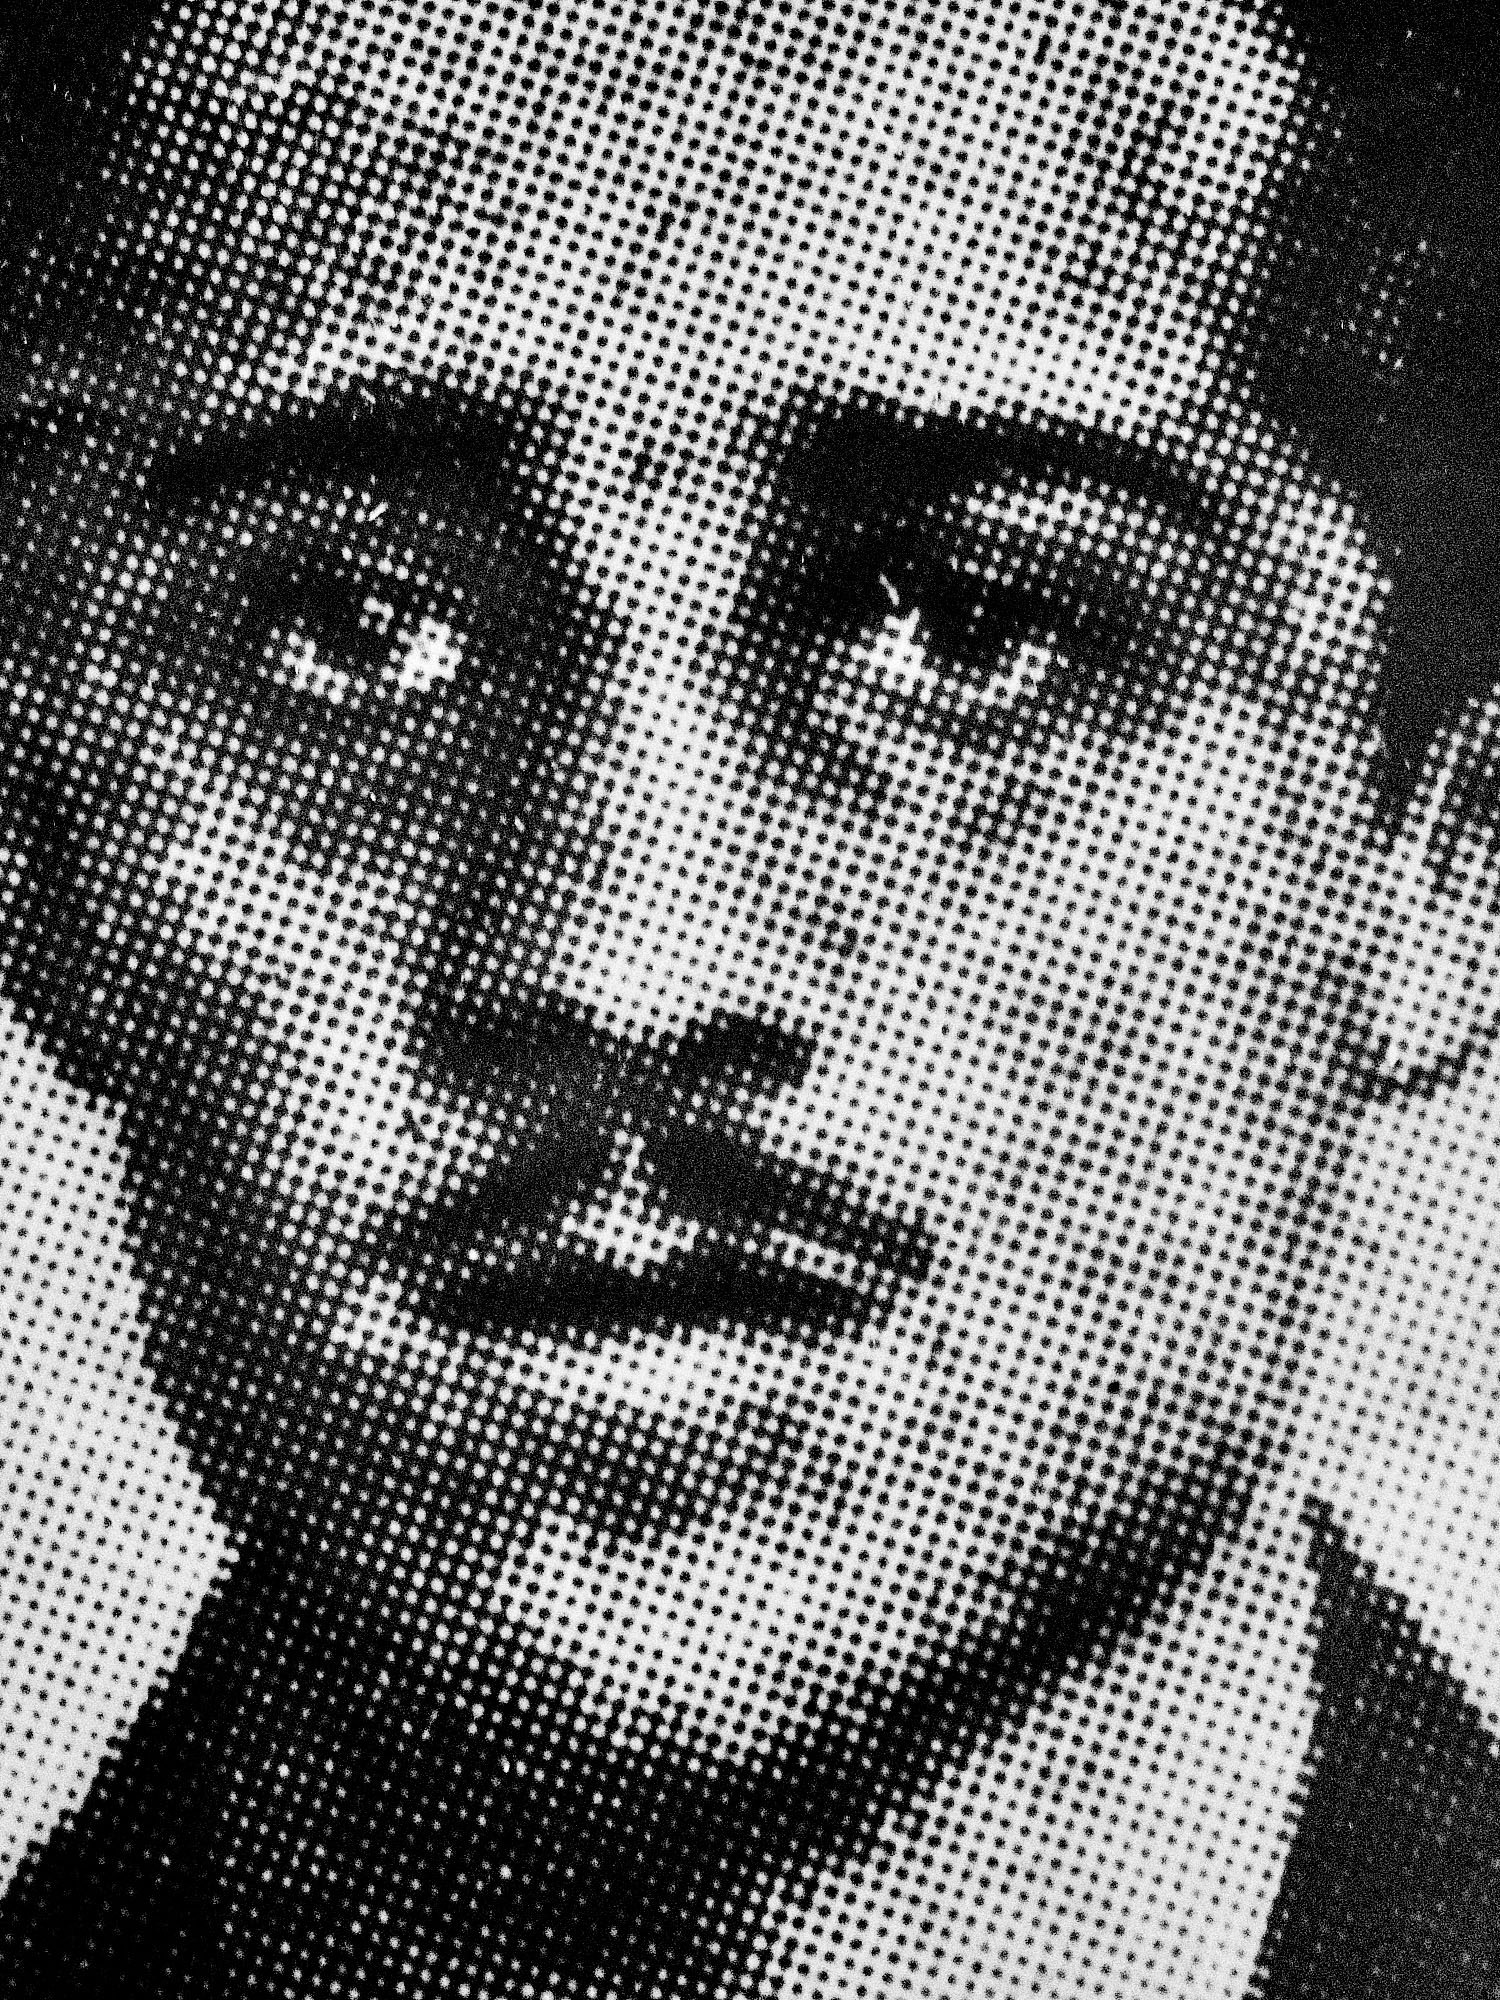 Gavrilo Princip, the Bosnian-Serb whose actions triggered a chain of events leading to First World War